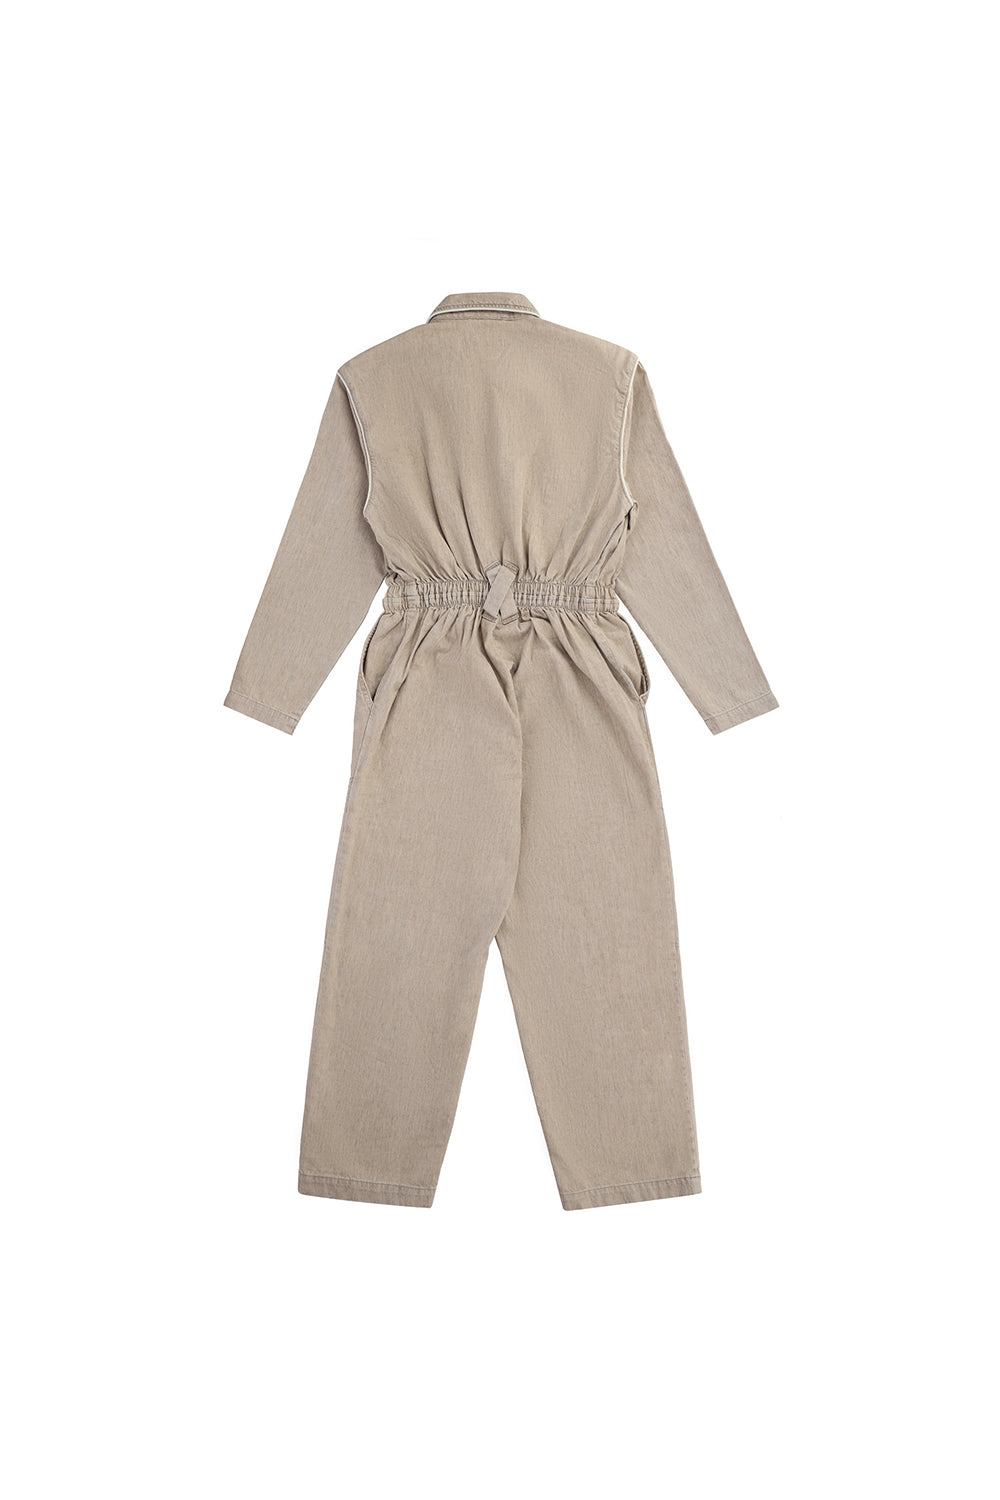 Amelia All in One in Sand Linen